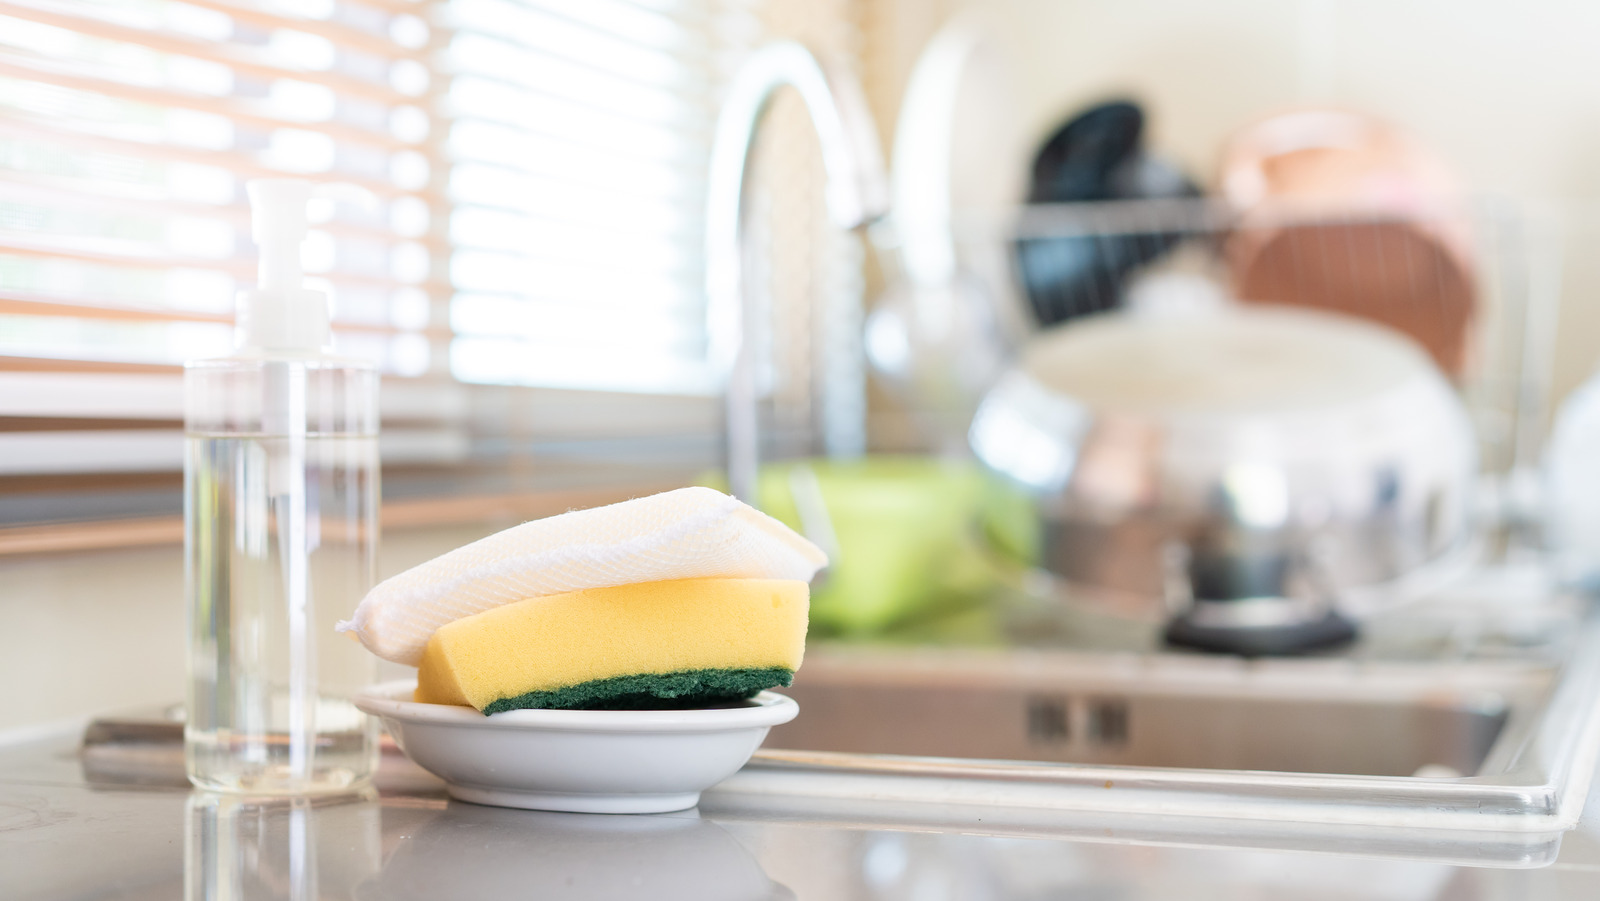 Can You Use Hand Soap To Wash Your Dishes?